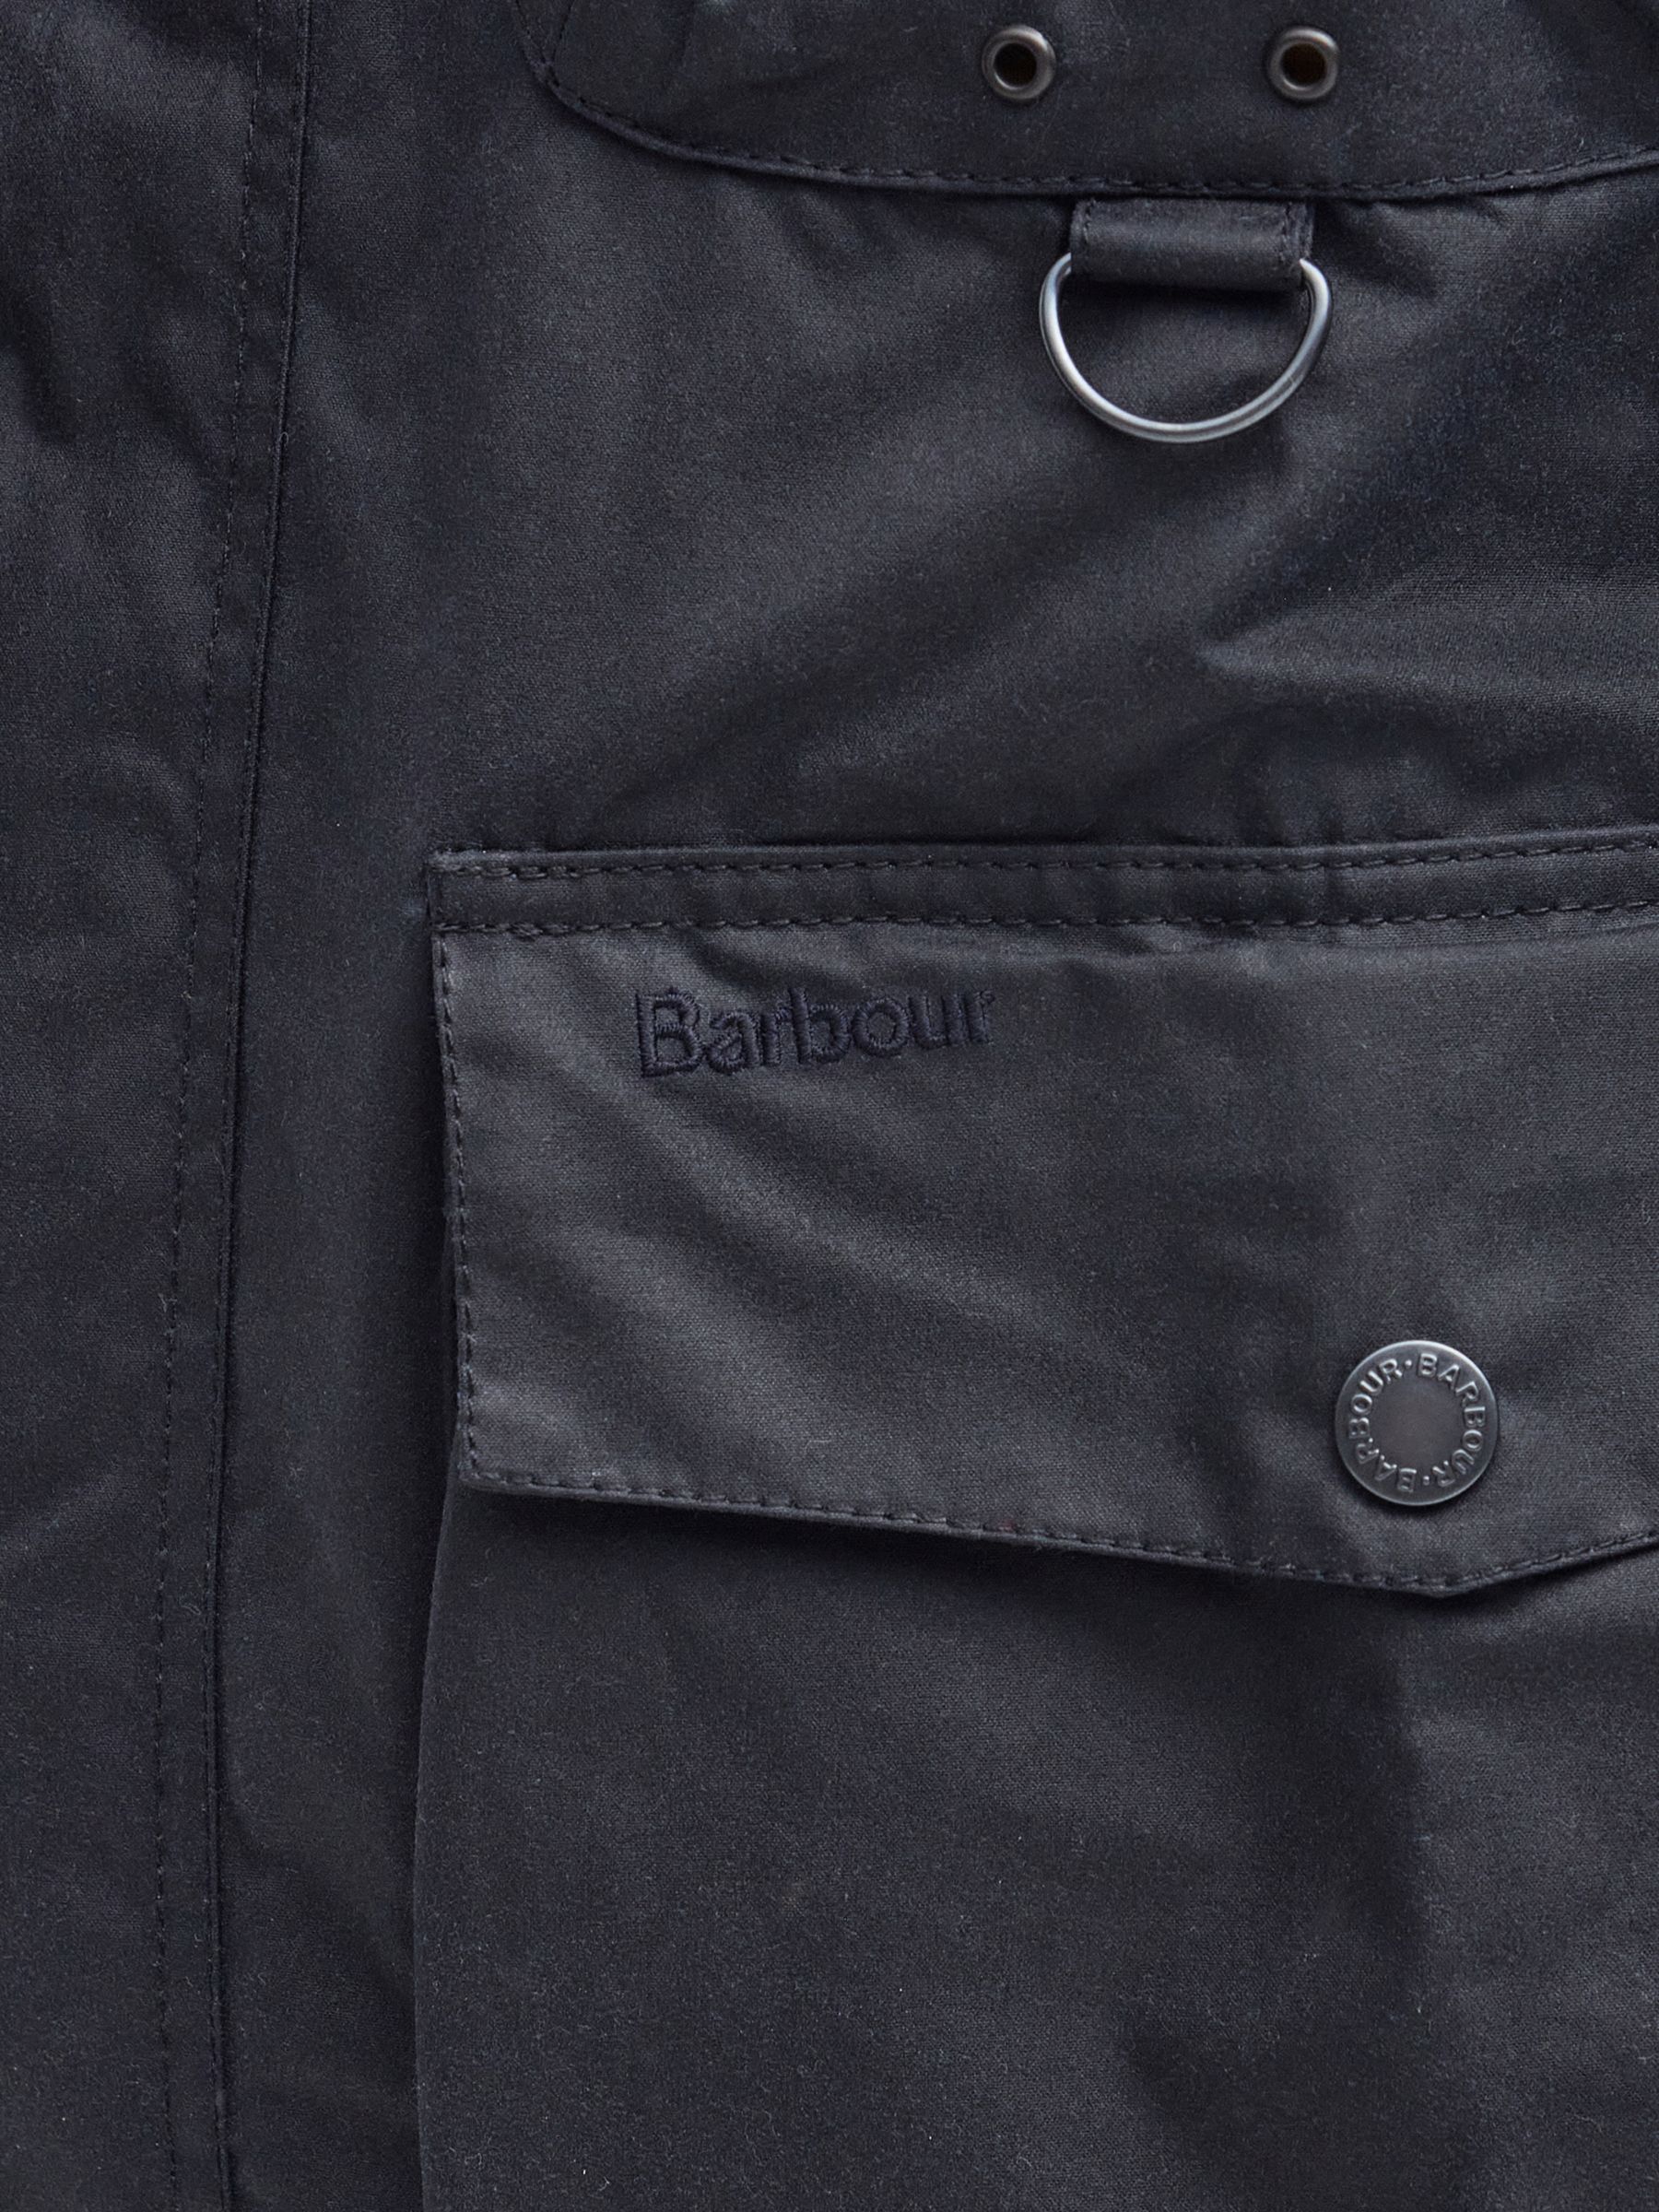 Barbour Tarn Utility Waxed Jacket, Navy at John Lewis & Partners